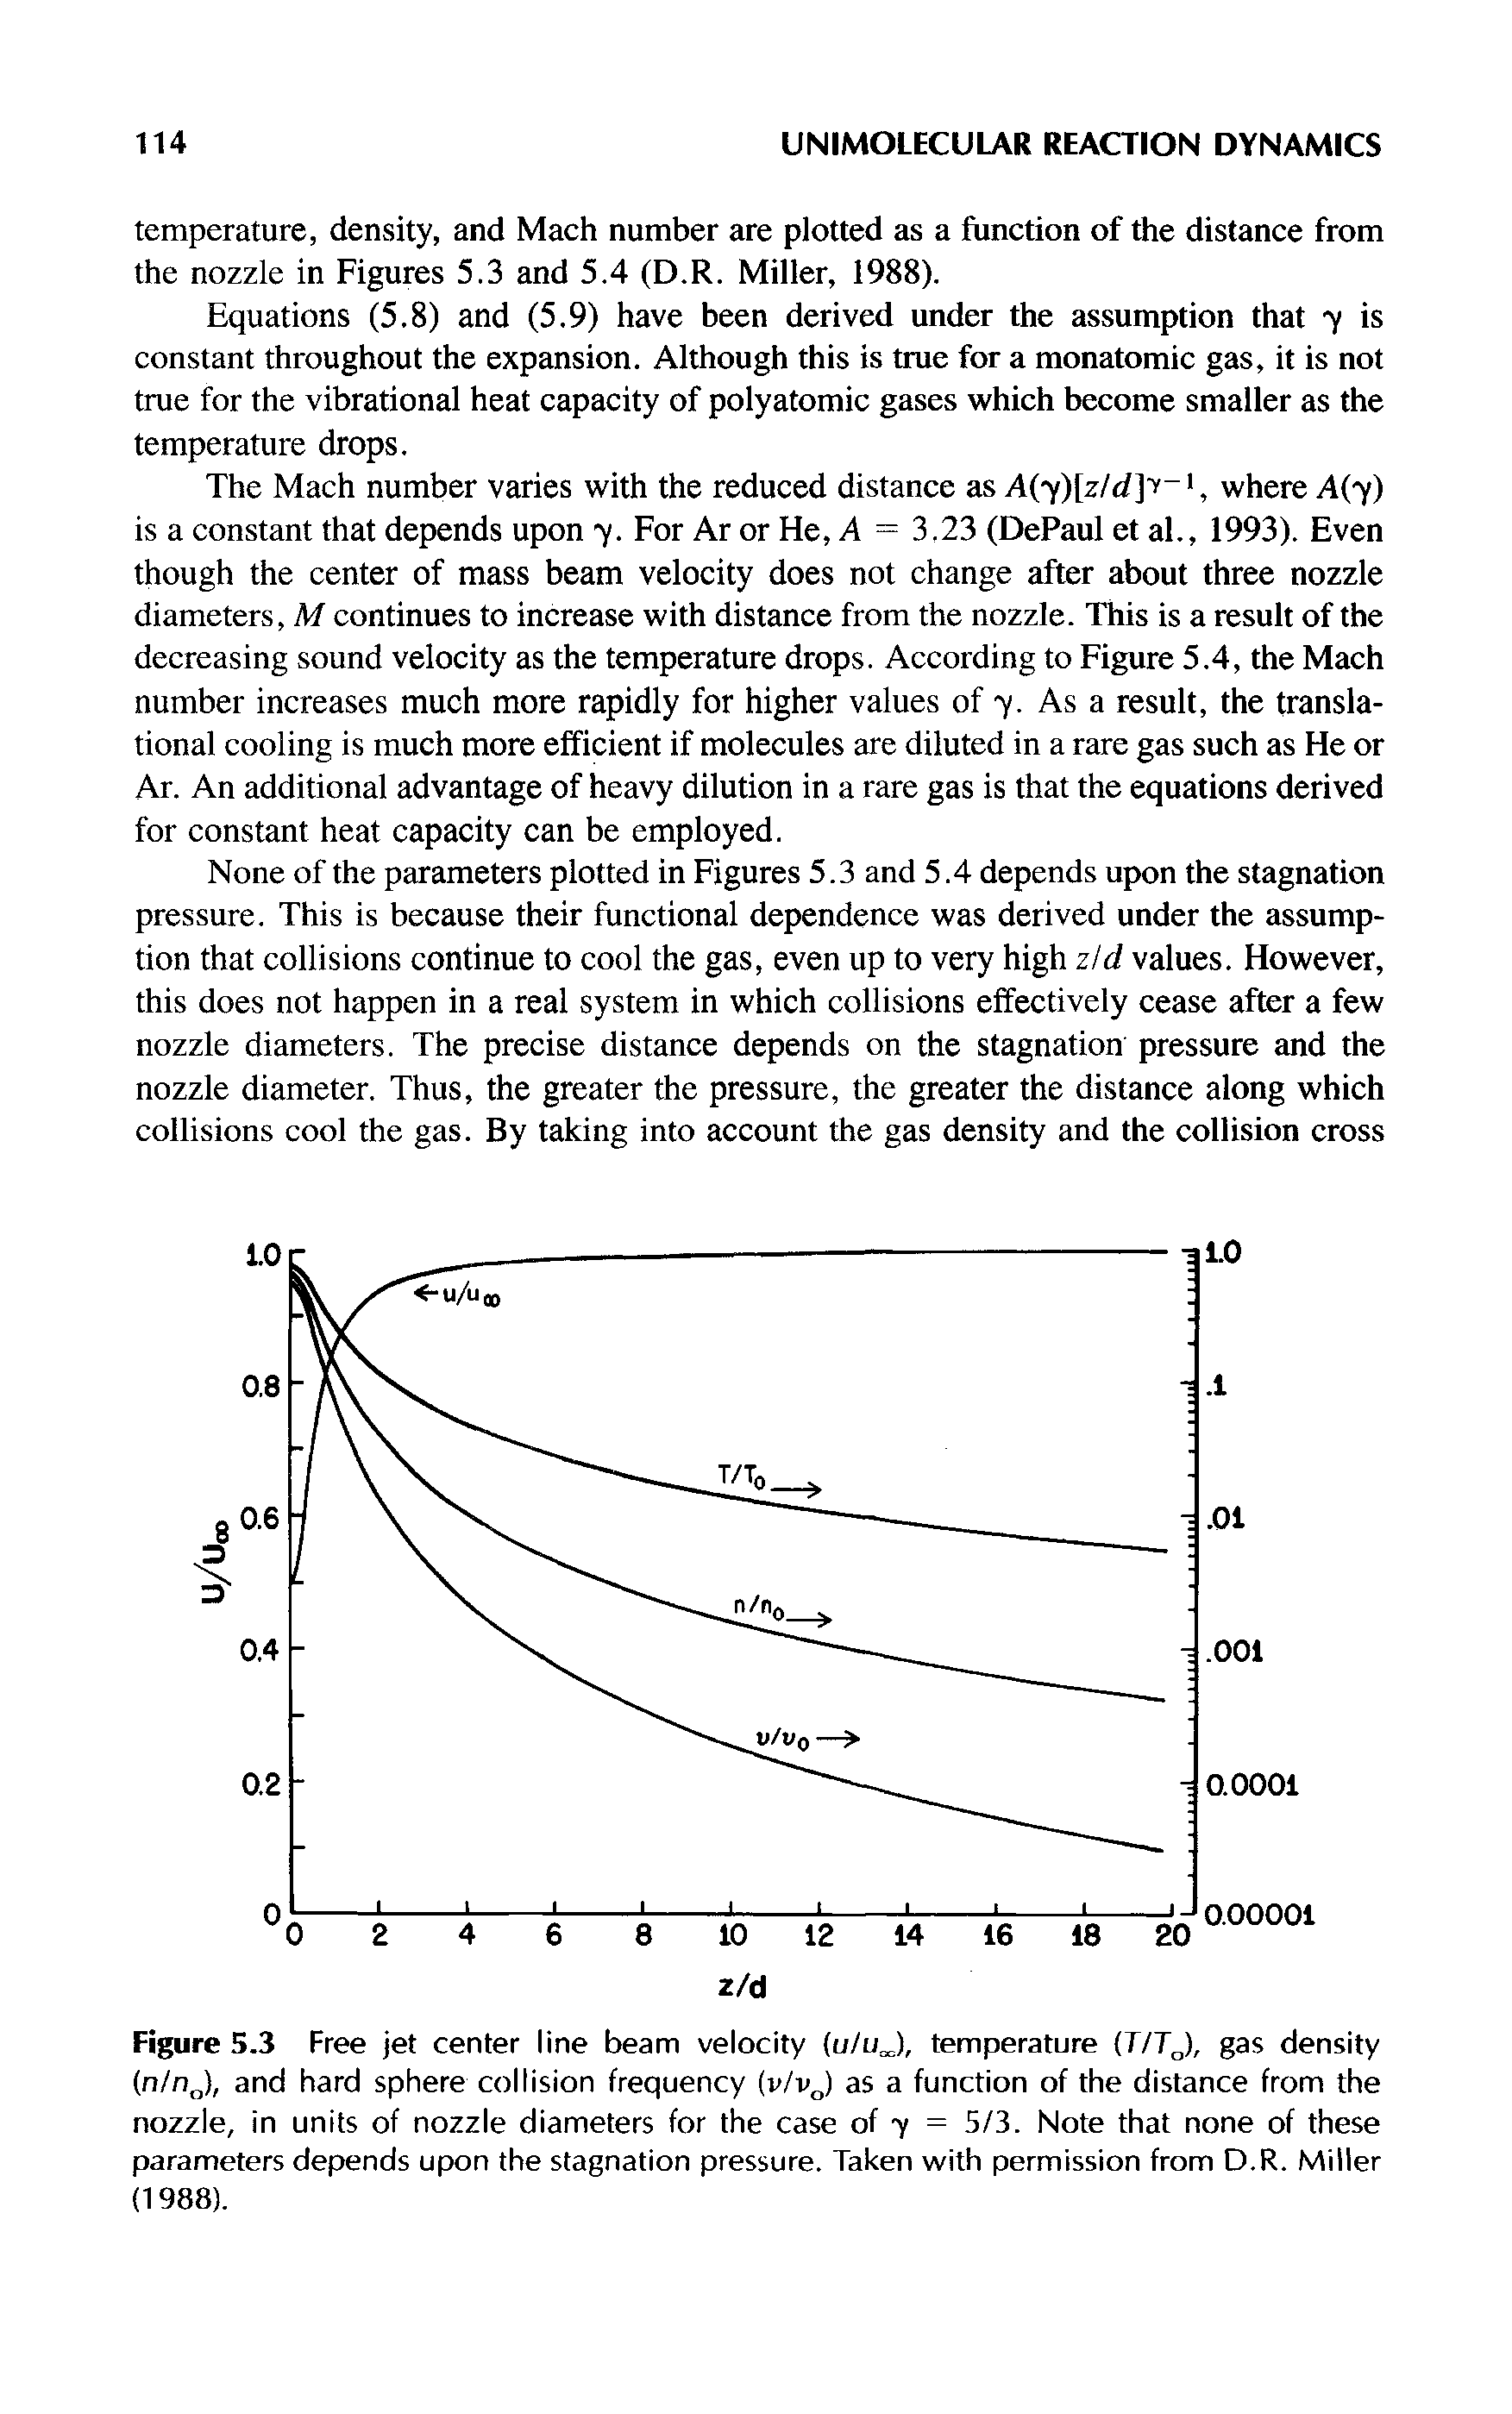 Figure 5.3 Free jet center line beam velocity (u/uj, temperature T/TJ, gas density (n/nj, and hard sphere collision frequency (v/vj as a function of the distance from the nozzle, in units of nozzle diameters for the case of 7 = 5/3. Note that none of these parameters depends upon the stagnation pressure. Taken with permission from D.R. Miller (1988).